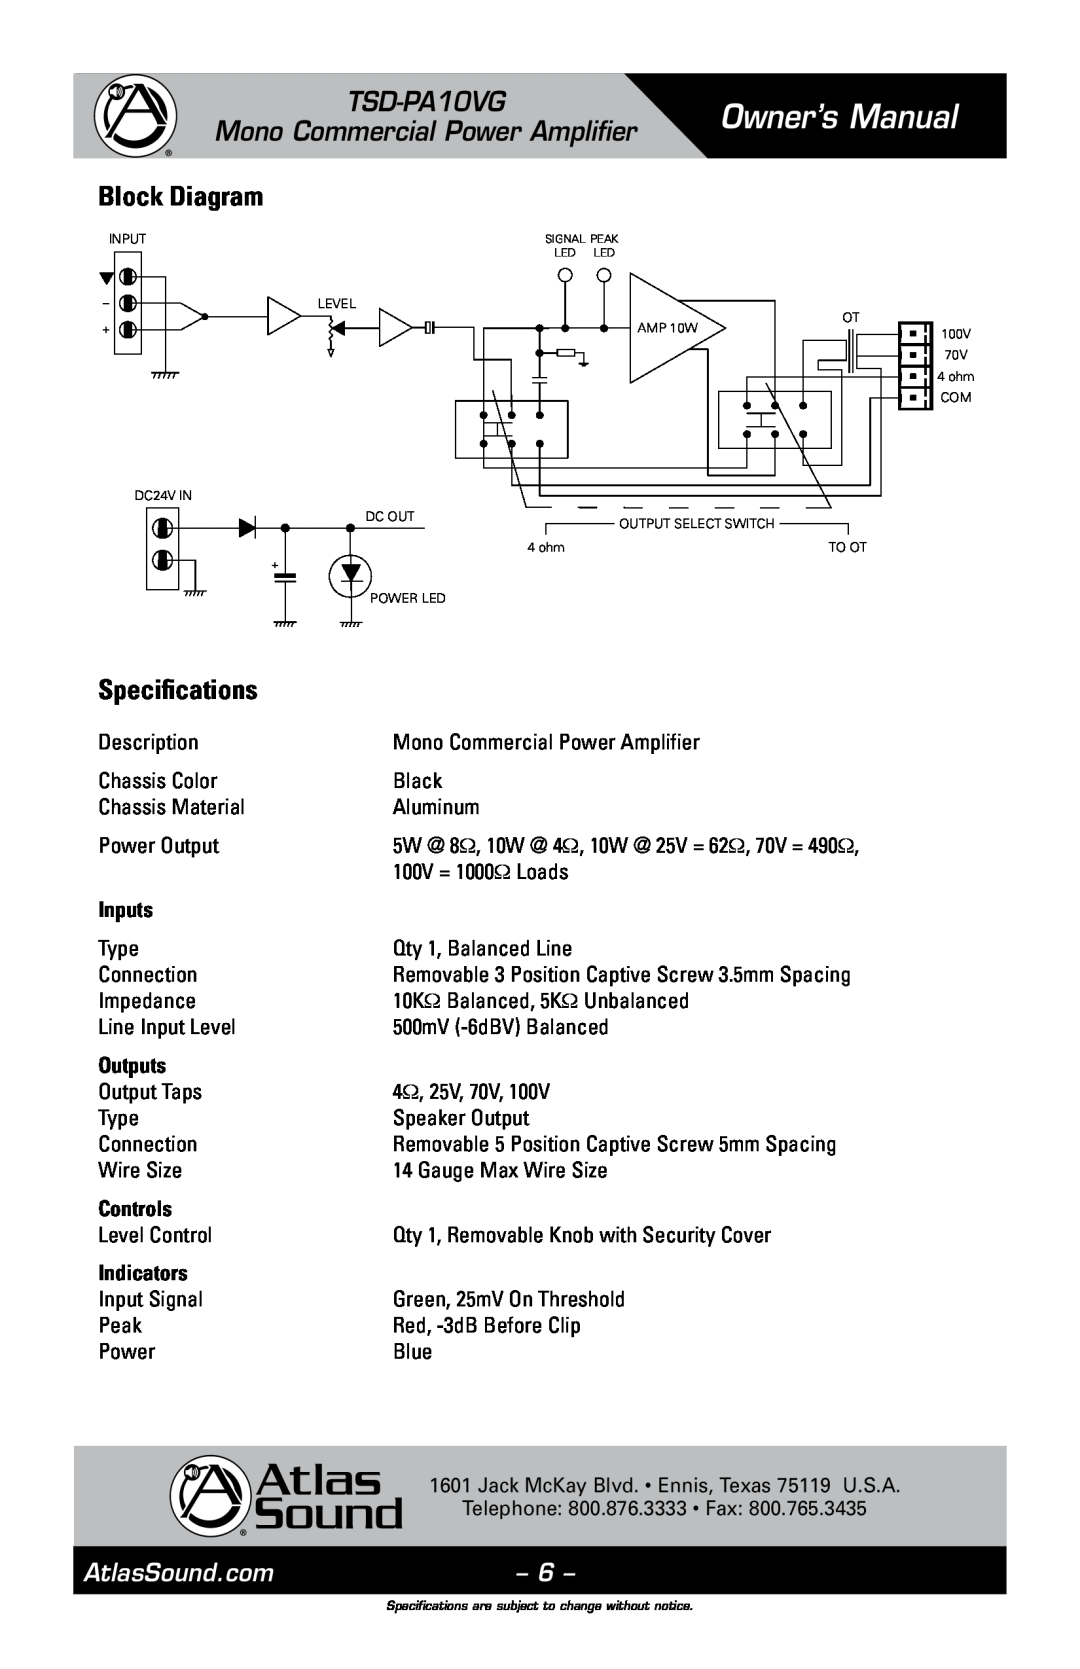 Atlas Sound TSD-PA10VG owner manual Block Diagram, Specifications, Inputs, Outputs, Controls, Indicators 